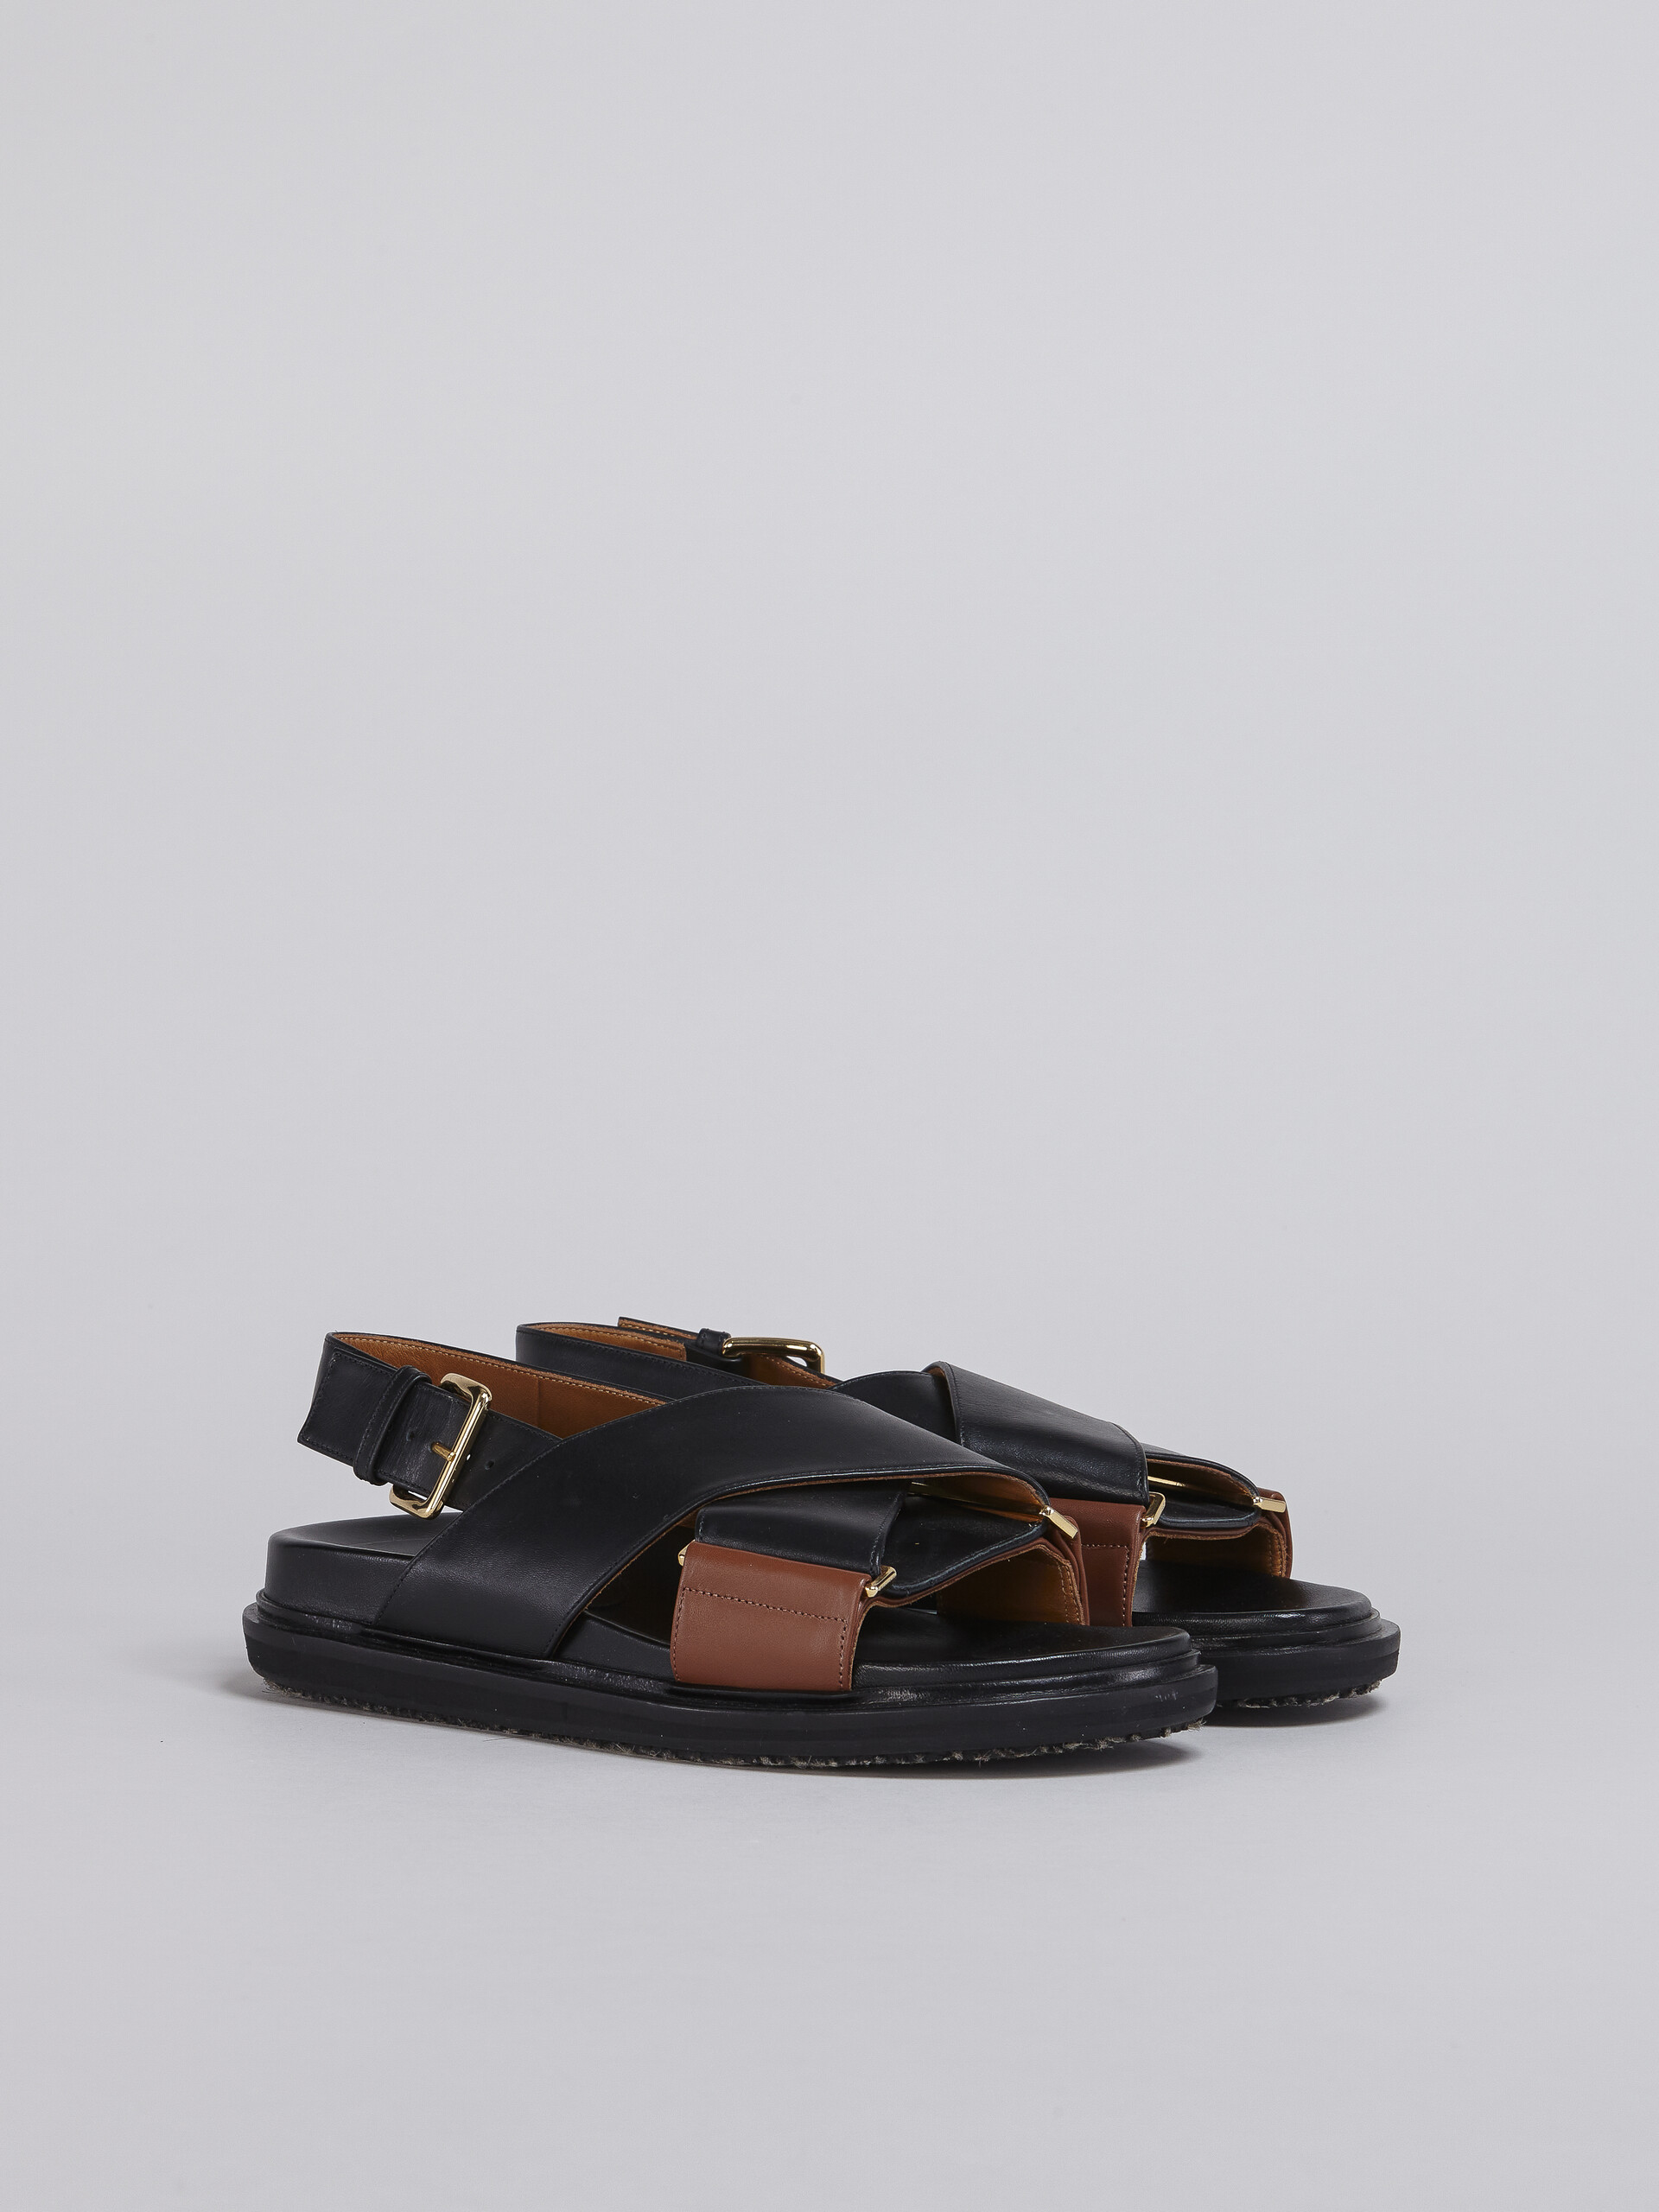 Black and brown leather Fussbett - Sandals - Image 2